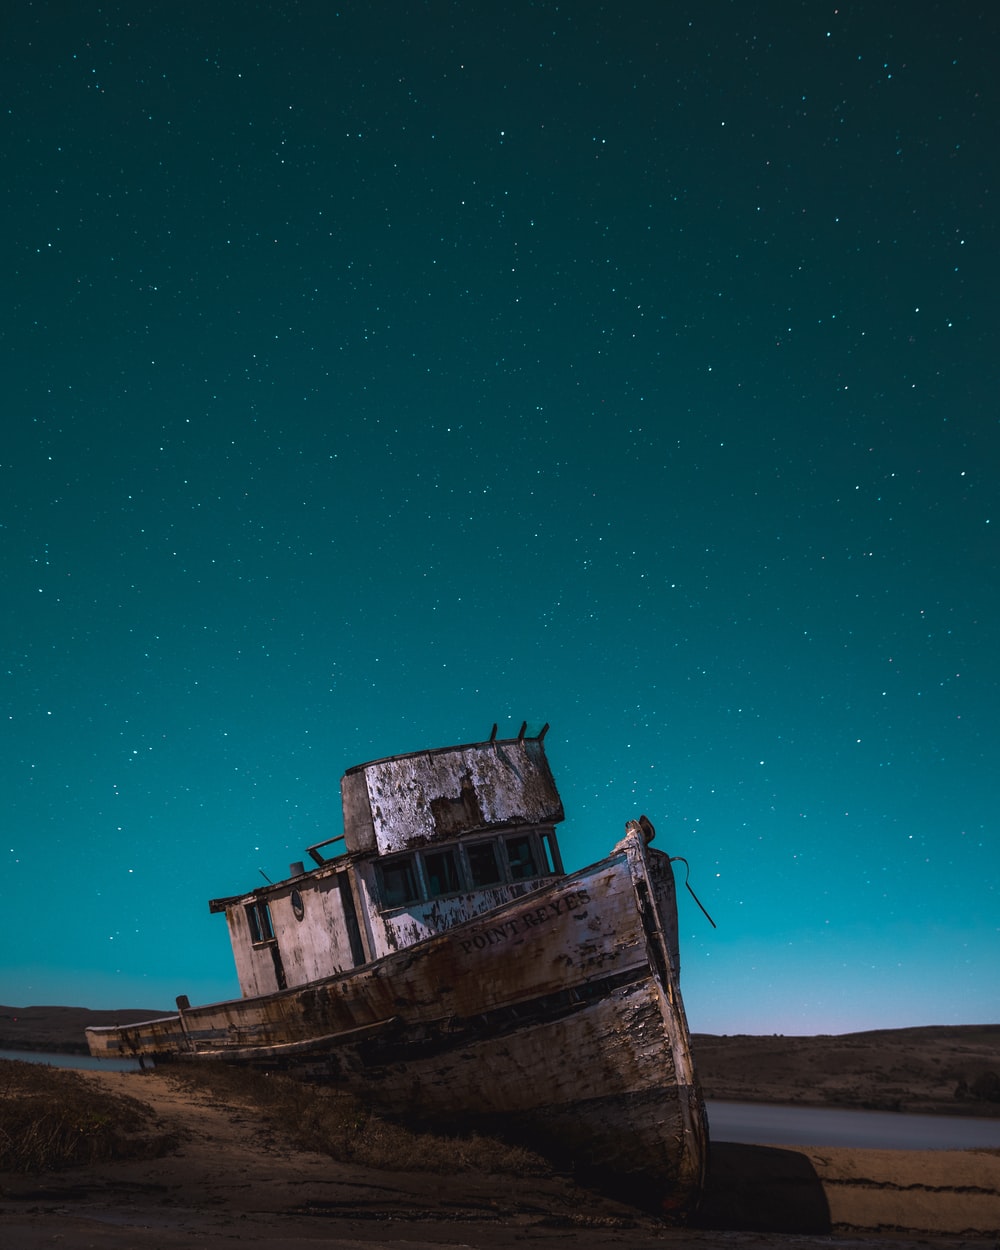 Abandoned Ship Picture. Download Free Image